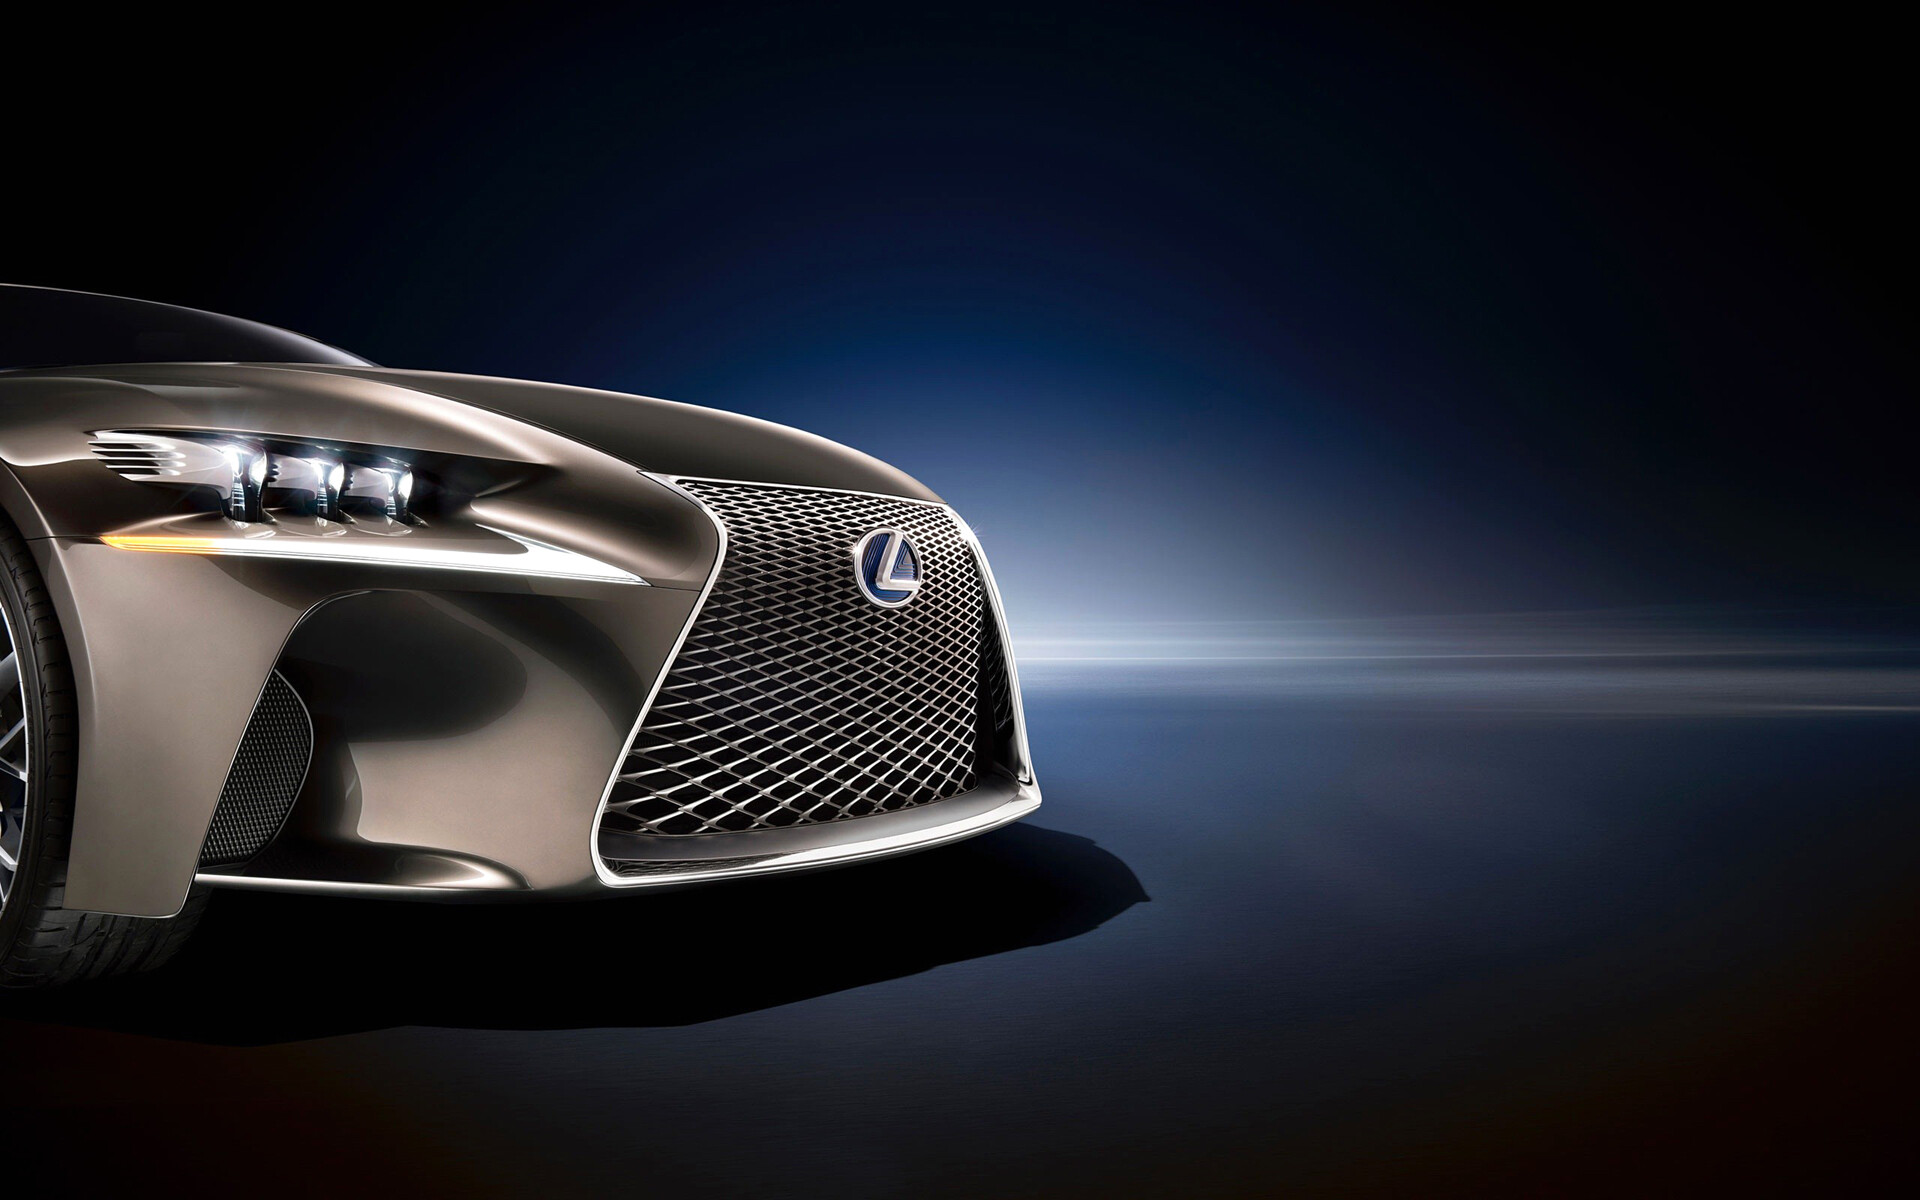 Lexus: A sports sedan produced by Japanese manufacturer, The famous spindle grille. 1920x1200 HD Wallpaper.